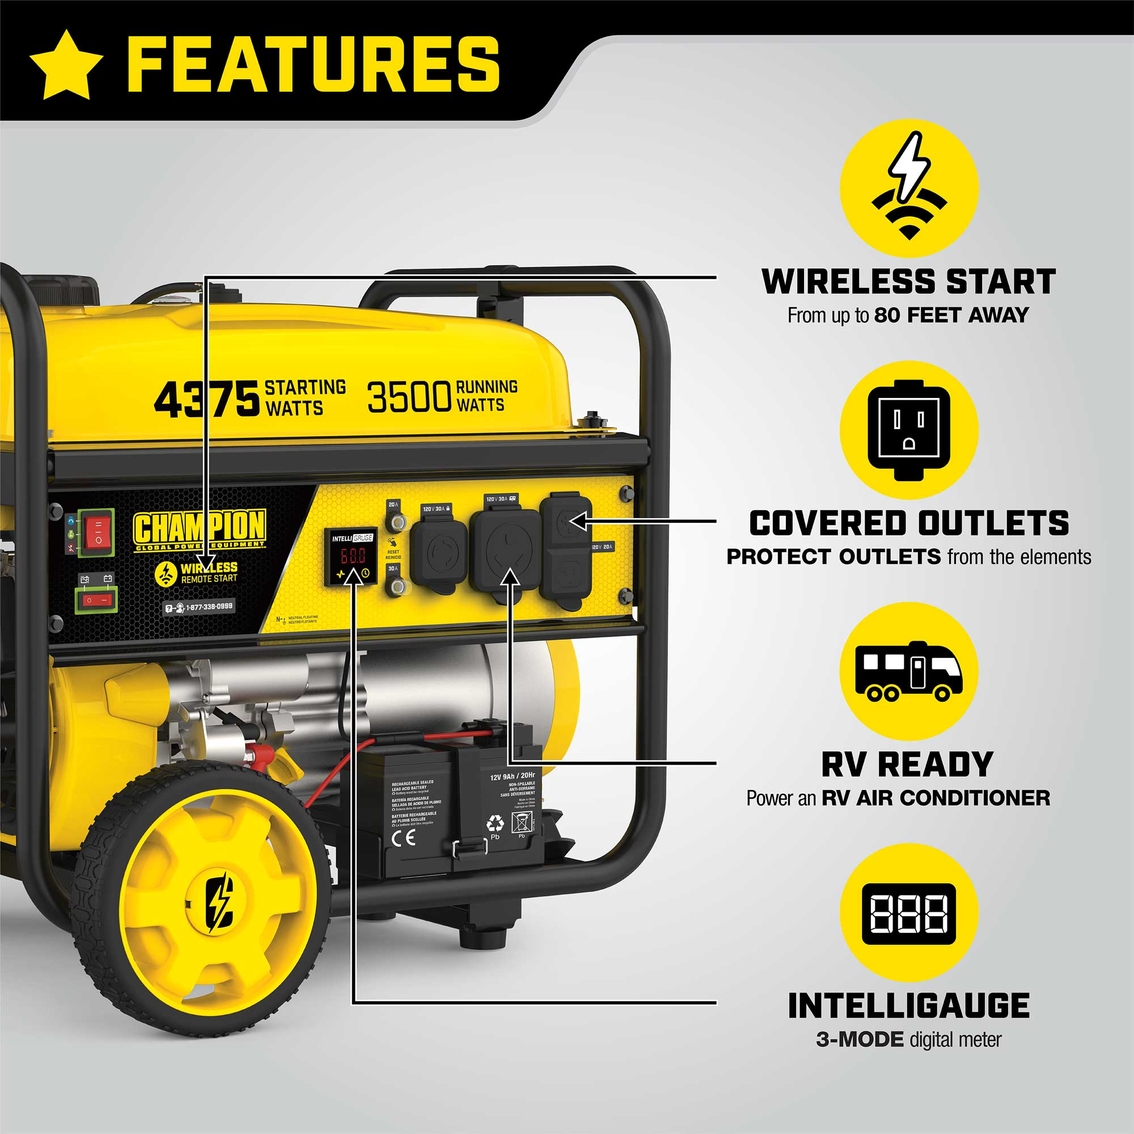 Champion 3500W RV Ready Portable Generator with Wireless Remote Start - Image 3 of 8